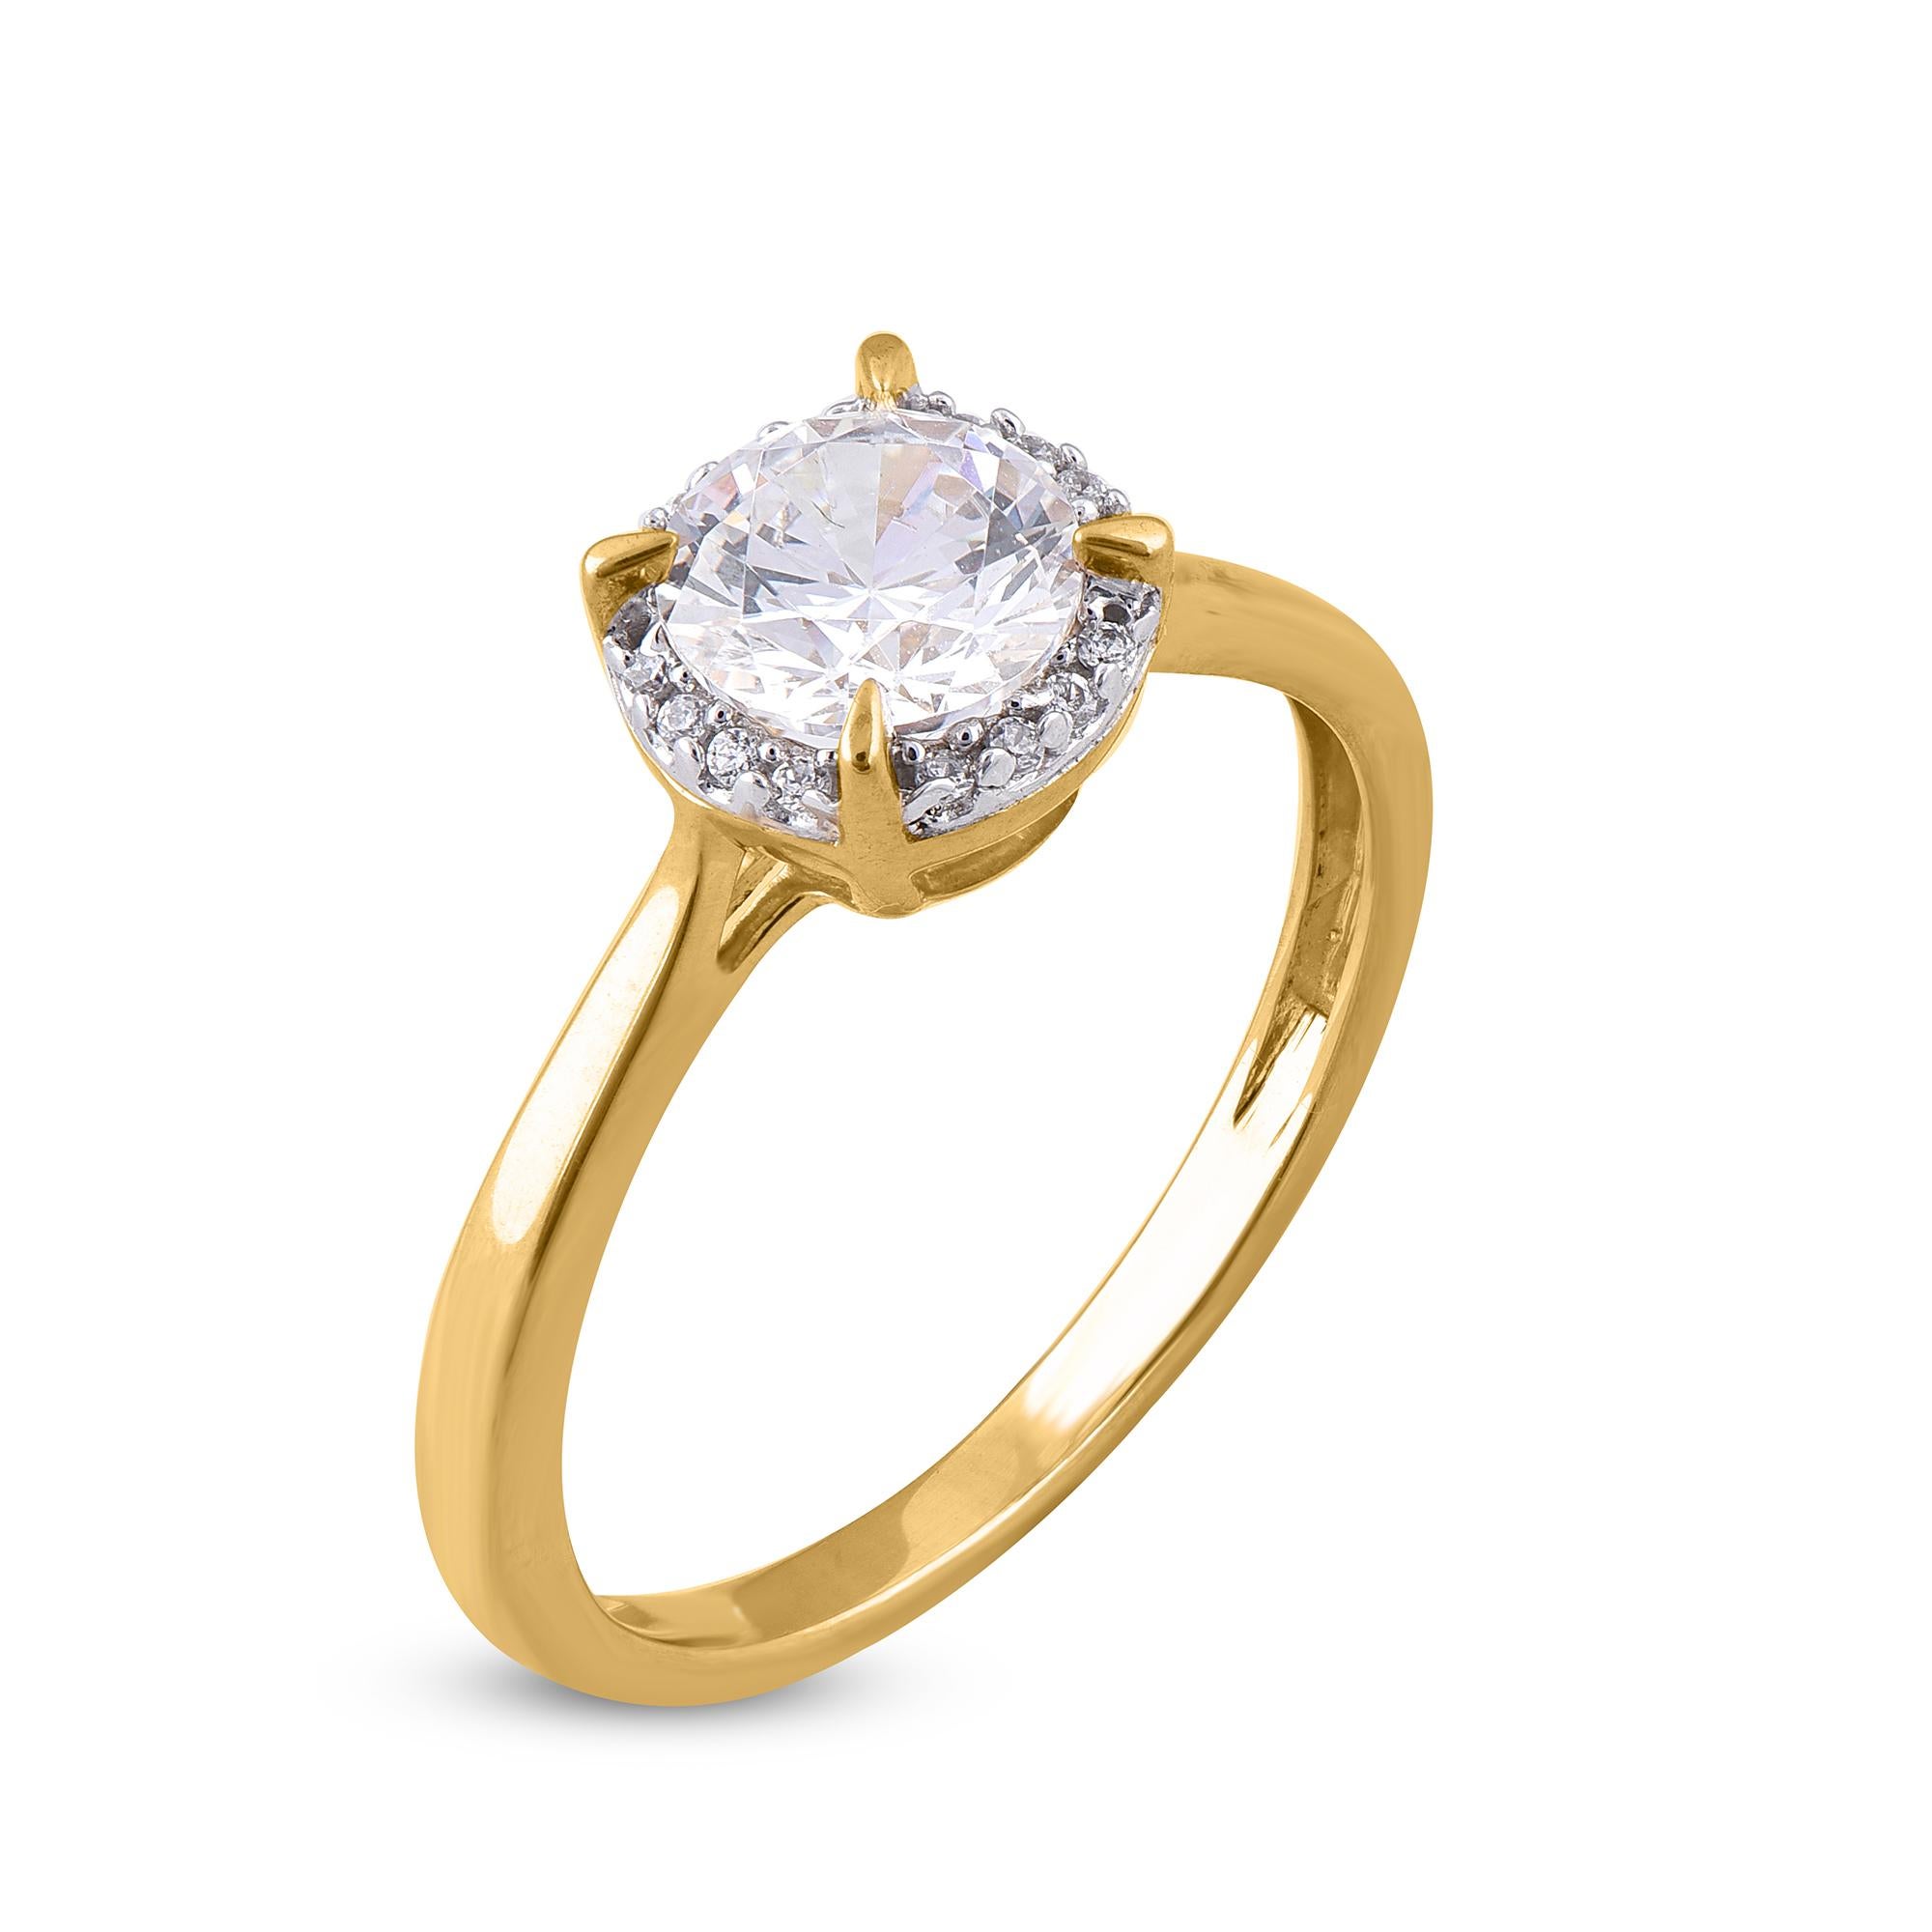 Classic and Contemprory, this diamond ring will enhance her jewelry collection. Embellished with 0.94 ct of centre stone and 0.06 ct of diamond on frame embellished beautifully in prong setting. Hand crafted beautifully in solid 18 kt Yellow gold